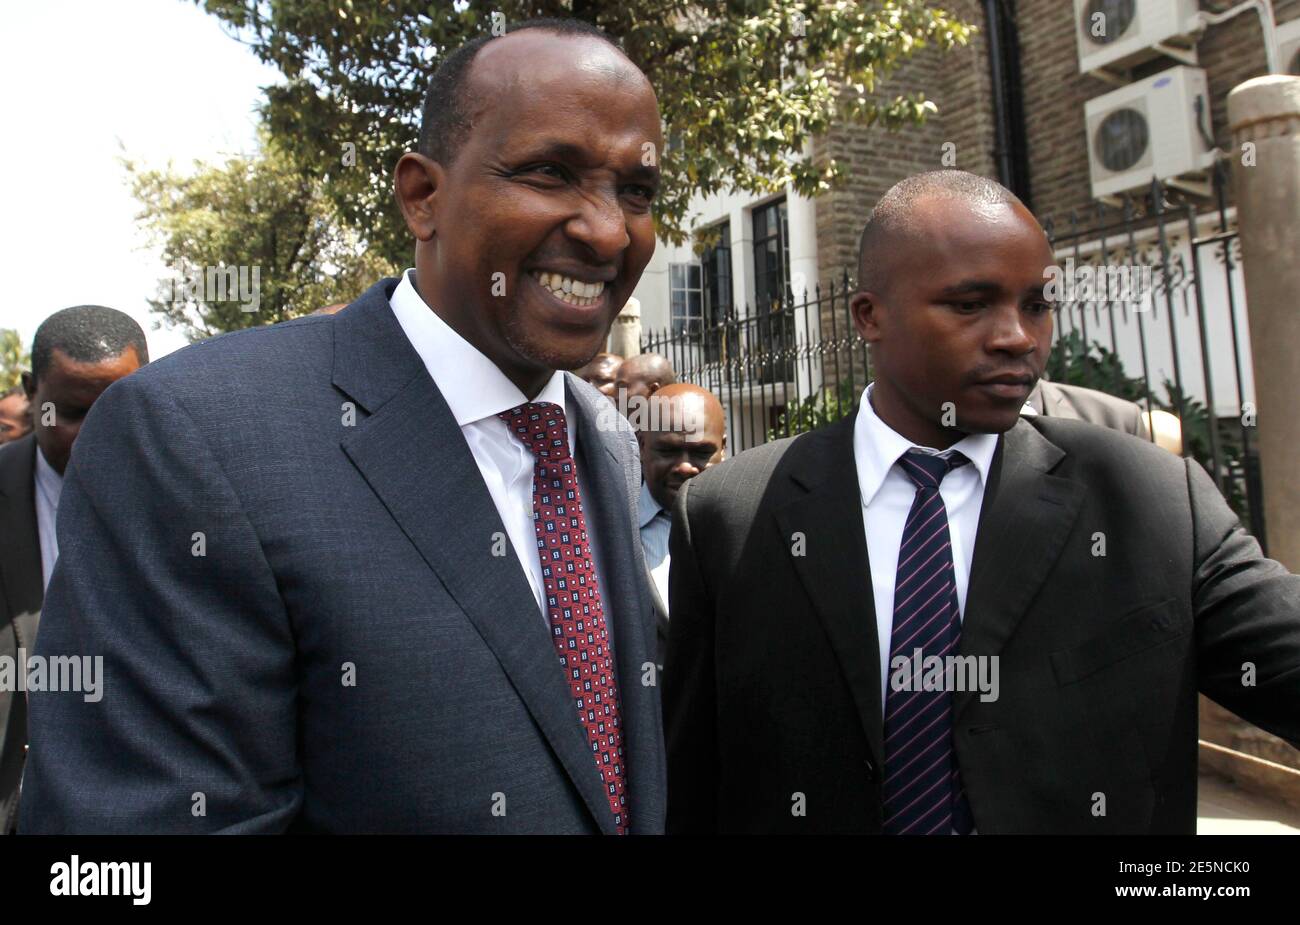 Kenya's National Assembly majority leader Aden Duale (L) is escorted as he walks out of Parliament in Kenya's capital Nairobi, December 18, 2014. Kenya's parliament approved new anti-terrorism laws on Thursday in the face of vocal protests by some opposition lawmakers who said the measures threatened civil liberties and free speech, legislators said. REUTERS/Thomas Mukoya (KENYA - Tags: POLITICS CIVIL UNREST) Stock Photo